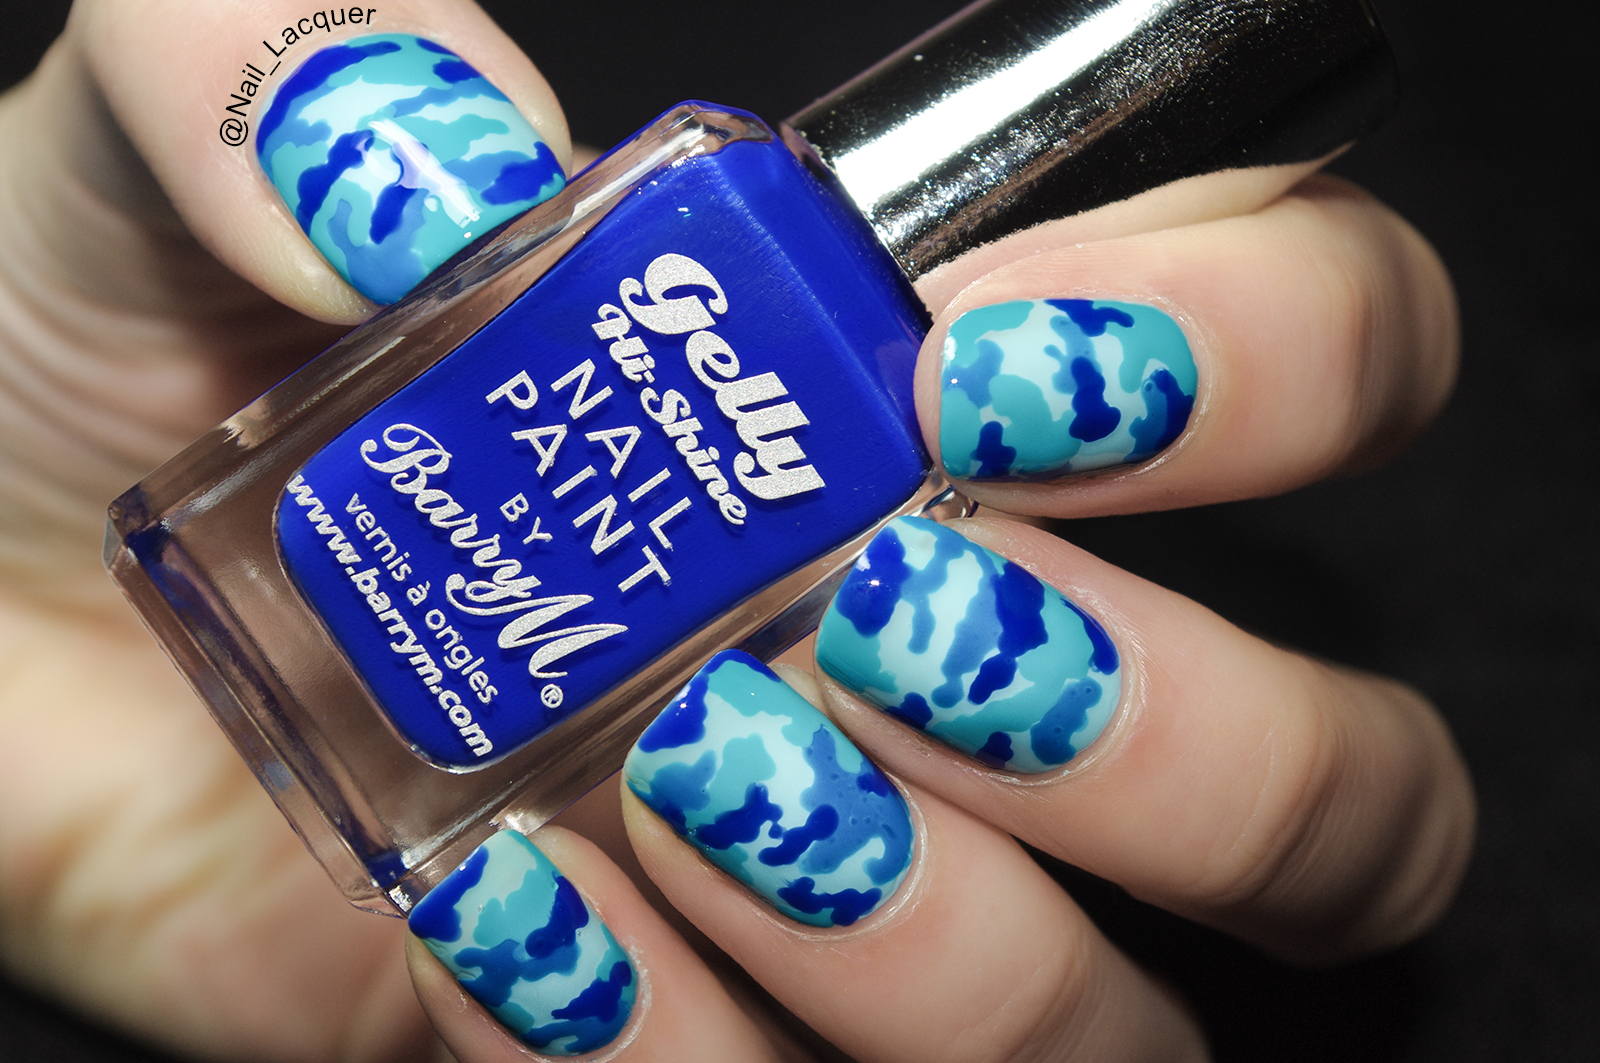 3. Camouflage nail art for Air Force fans - wide 1